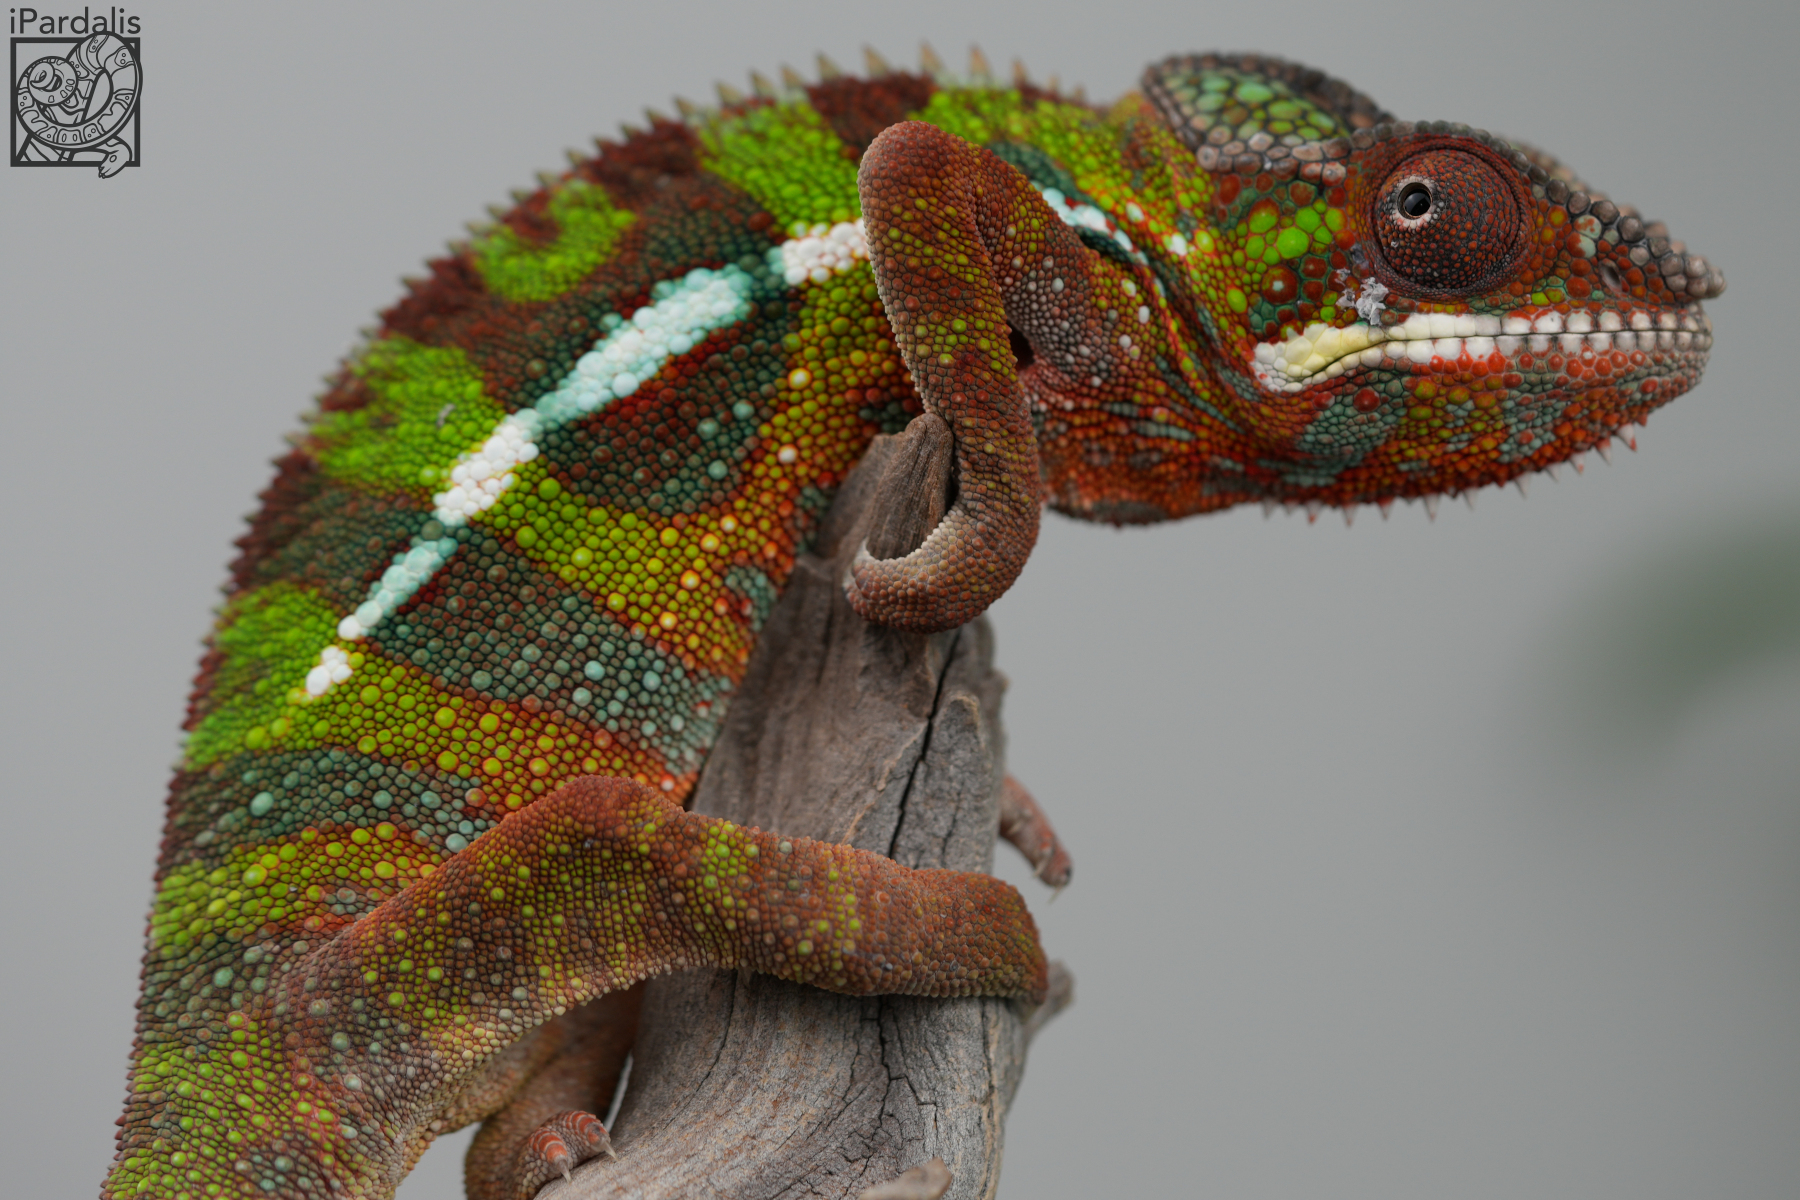 Panther Chameleon for sale: M1 - Zandrin x Mara SOLD OUT